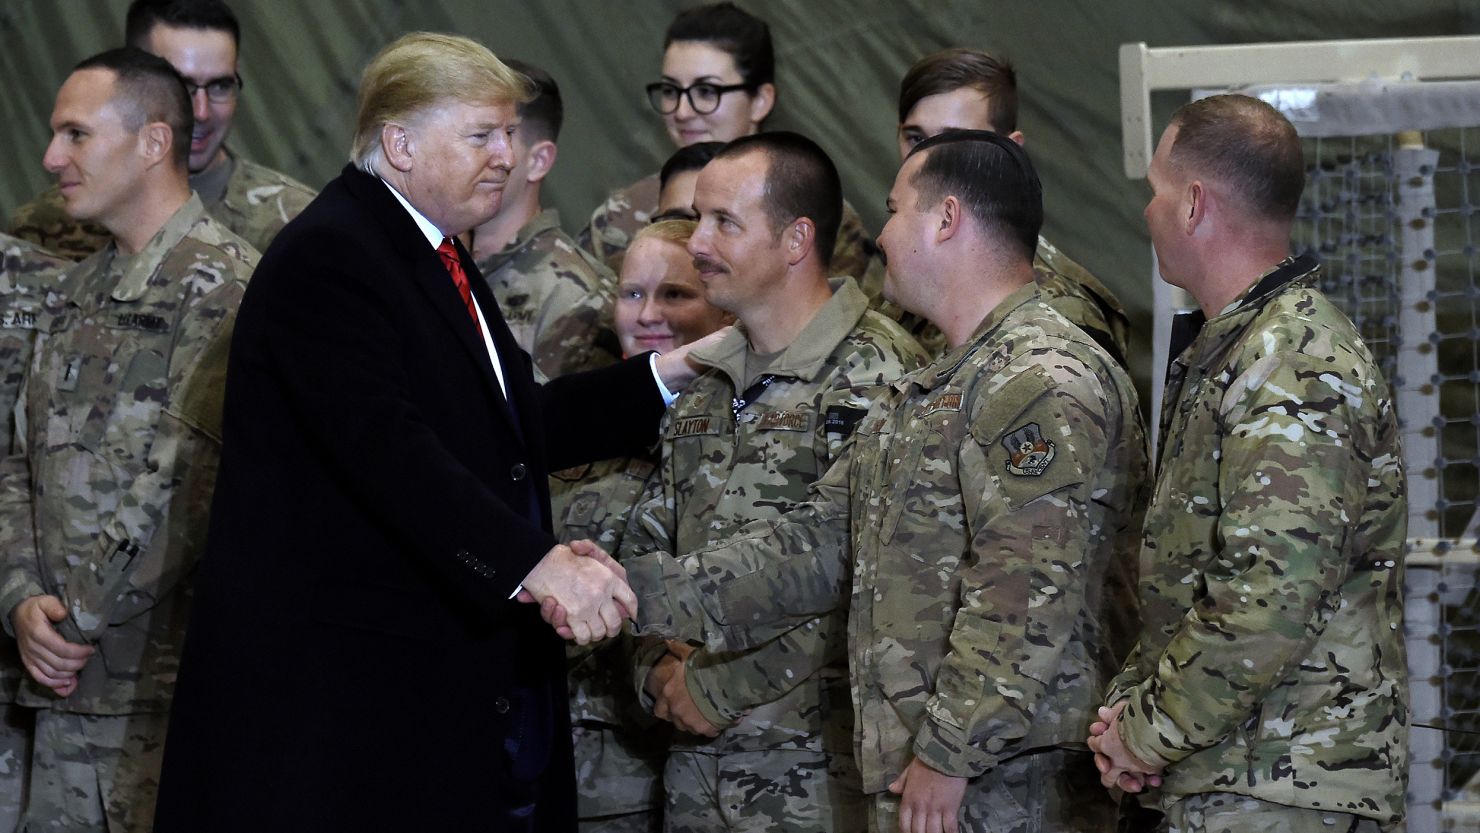 US President Donald Trump greets soldiers after speaking to the troops during a surprise Thanksgiving day visit at Bagram Air Field, on November 28, 2019 in Afghanistan.